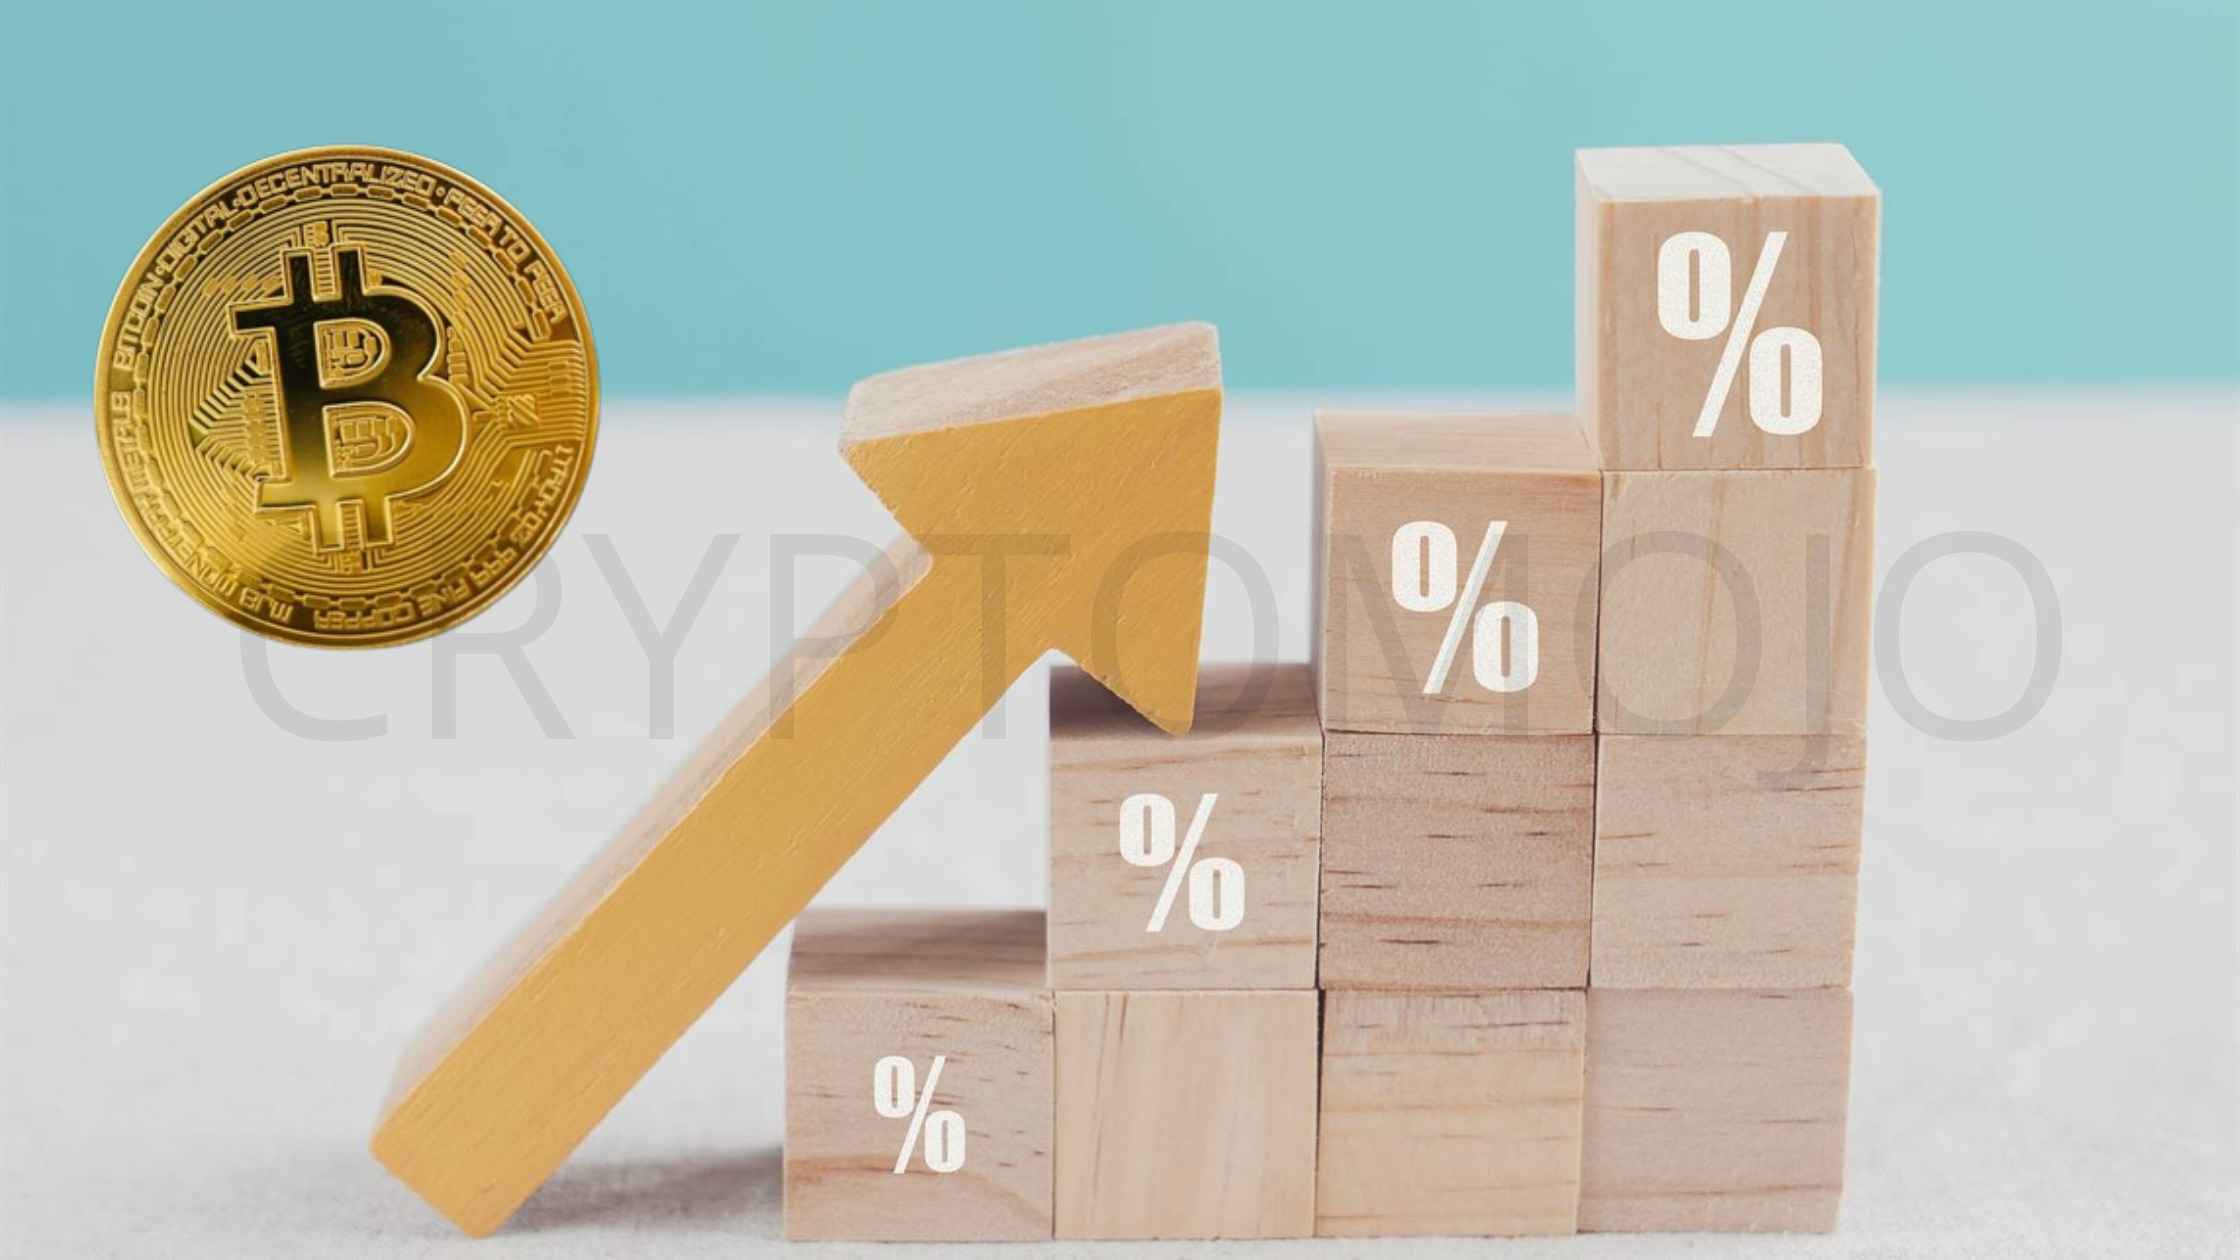 US Inflation Hit A 40-Year High: How Will This Impact The Price Of Bitcoin?